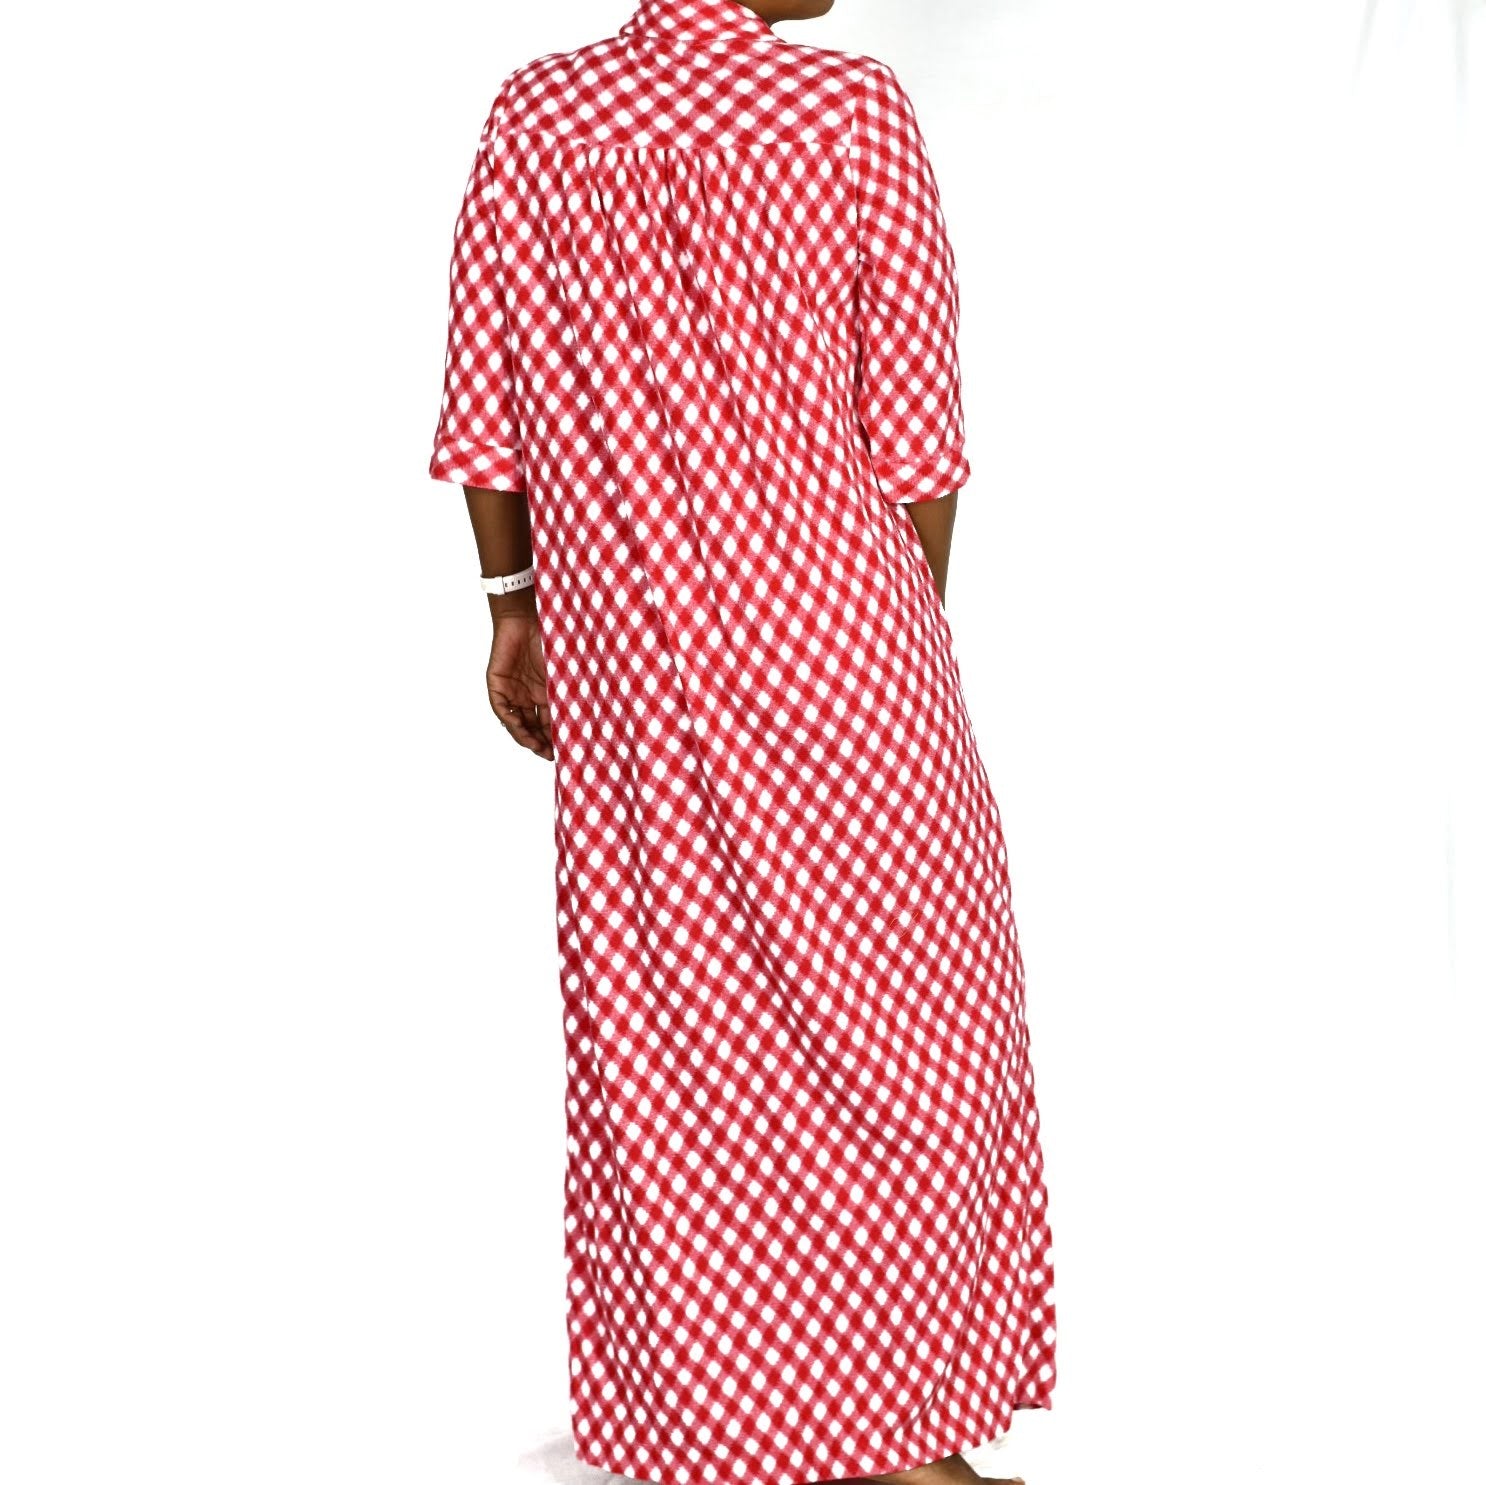 Vintage Red Check Housecoat Size Medium